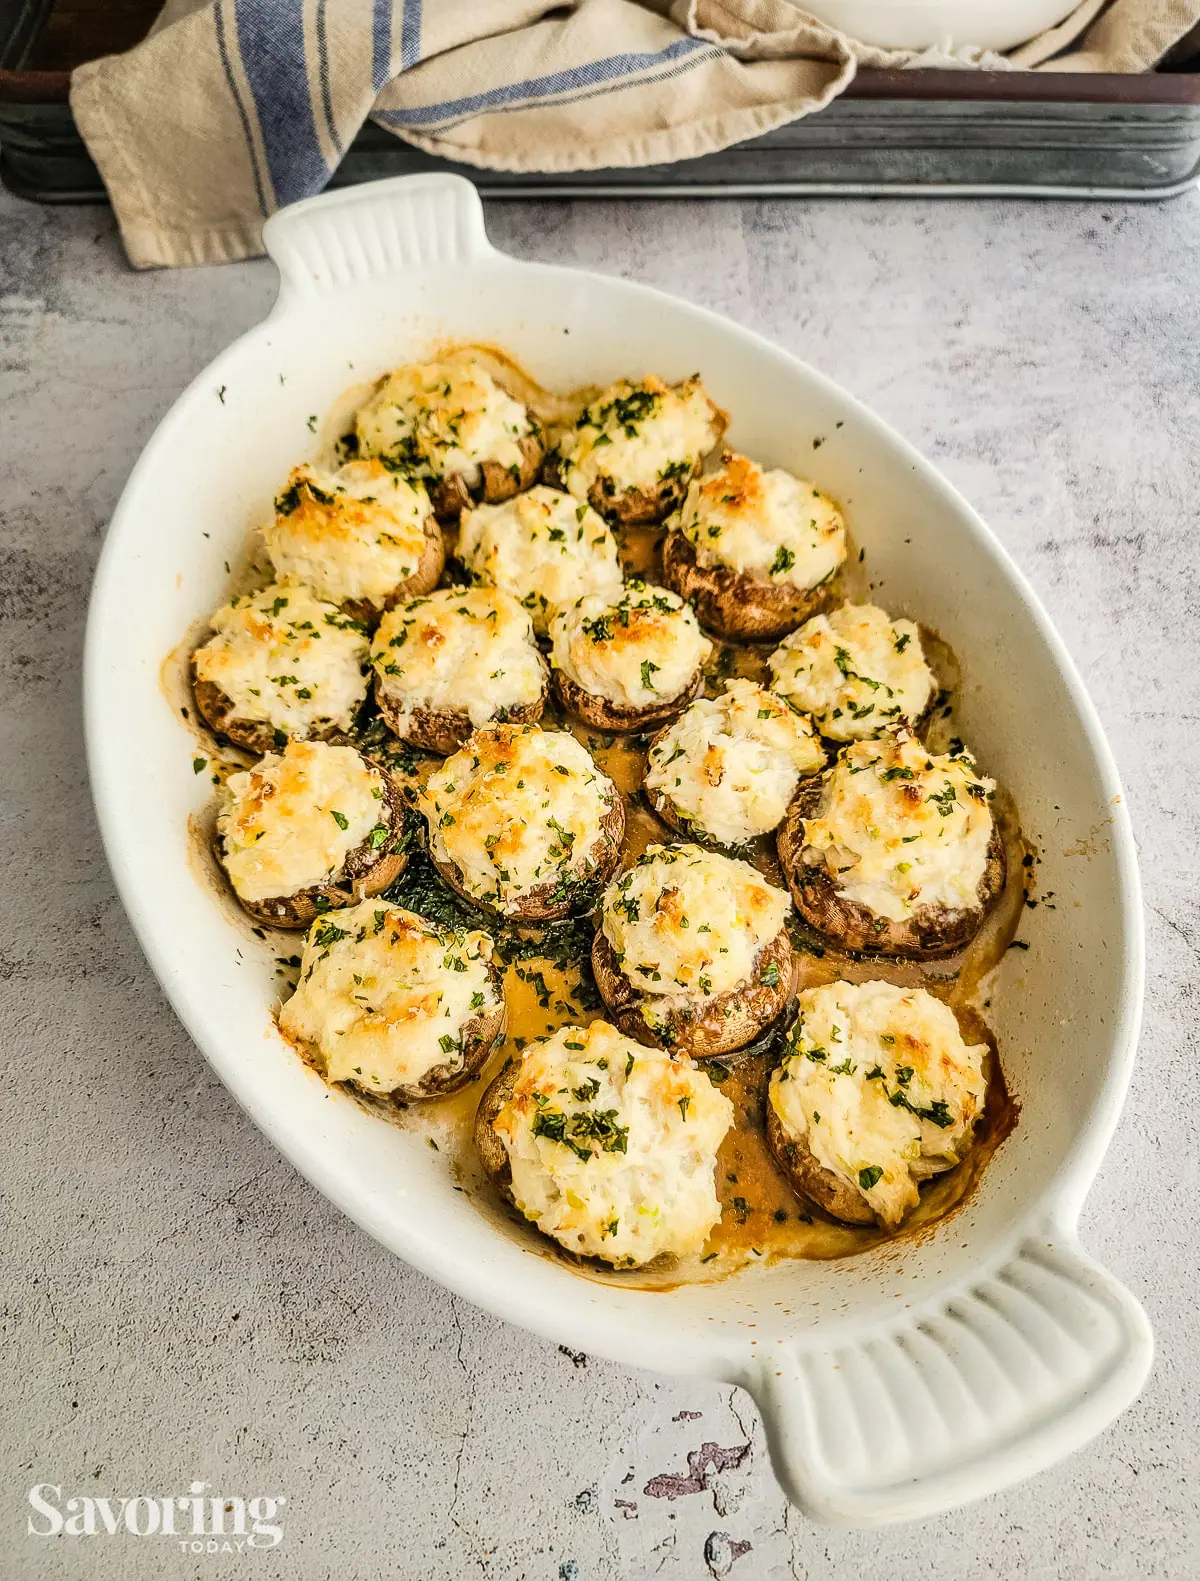 Stuffed mushrooms in a white baking dish on a concrete counter